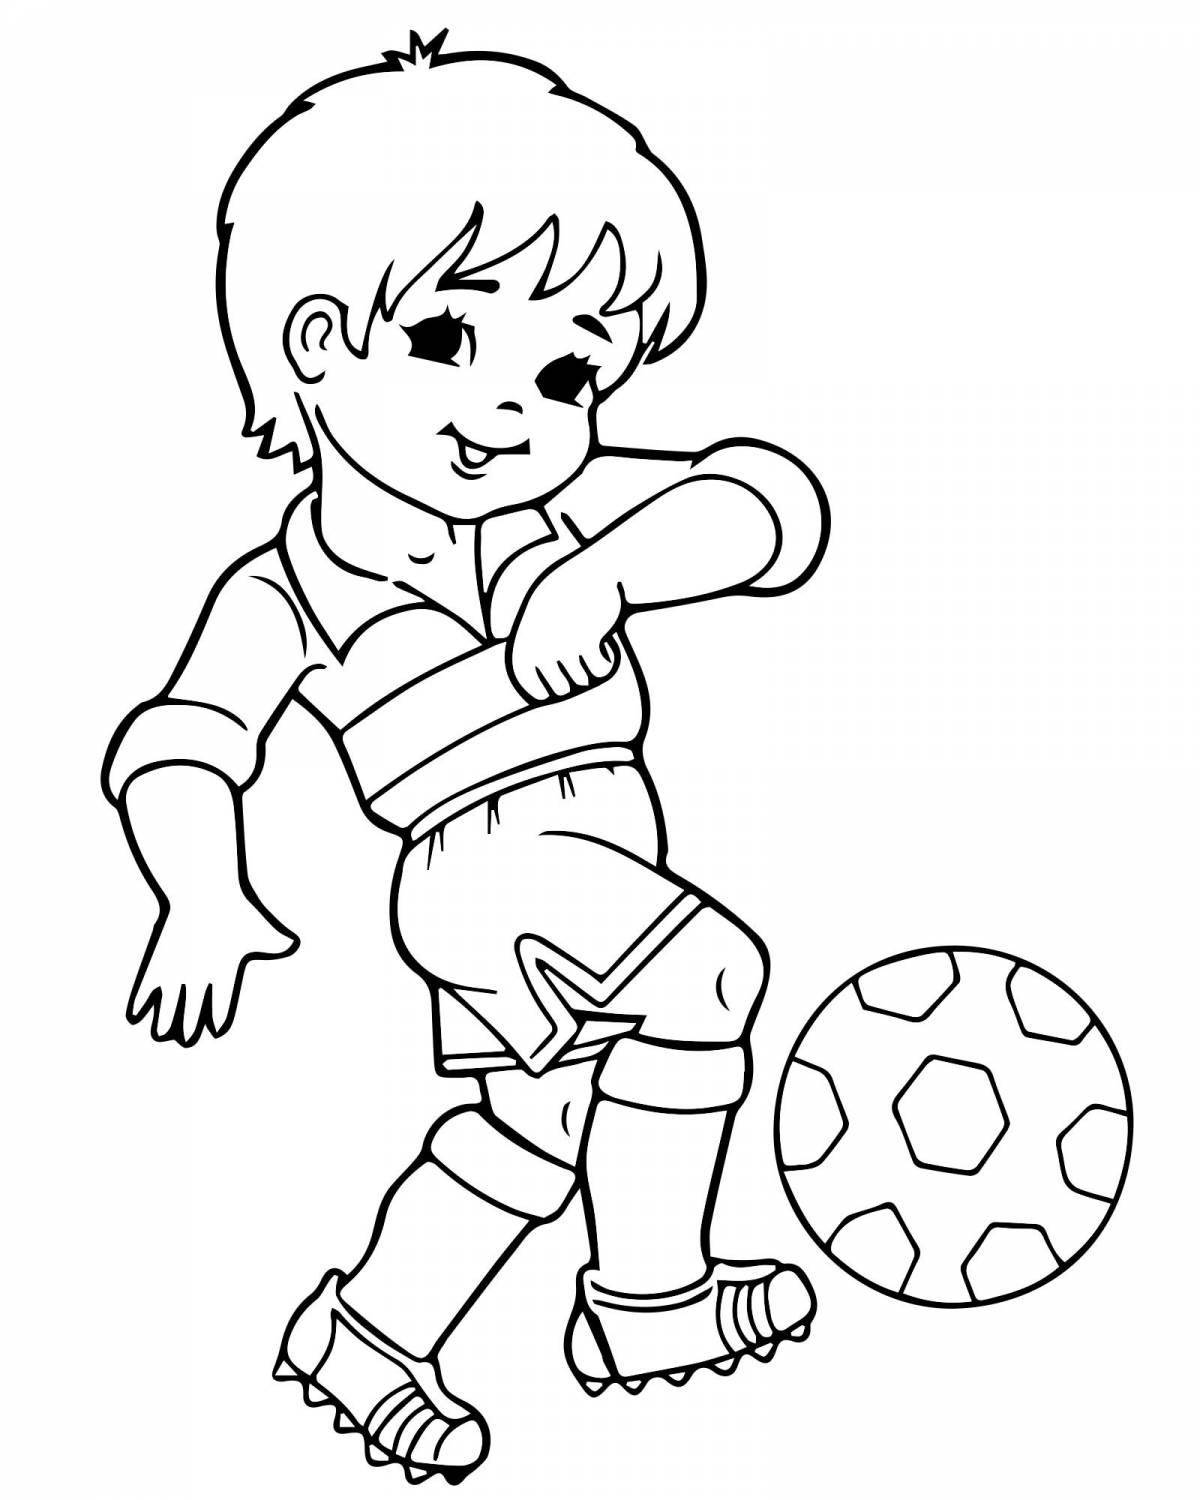 Bright children playing coloring pages